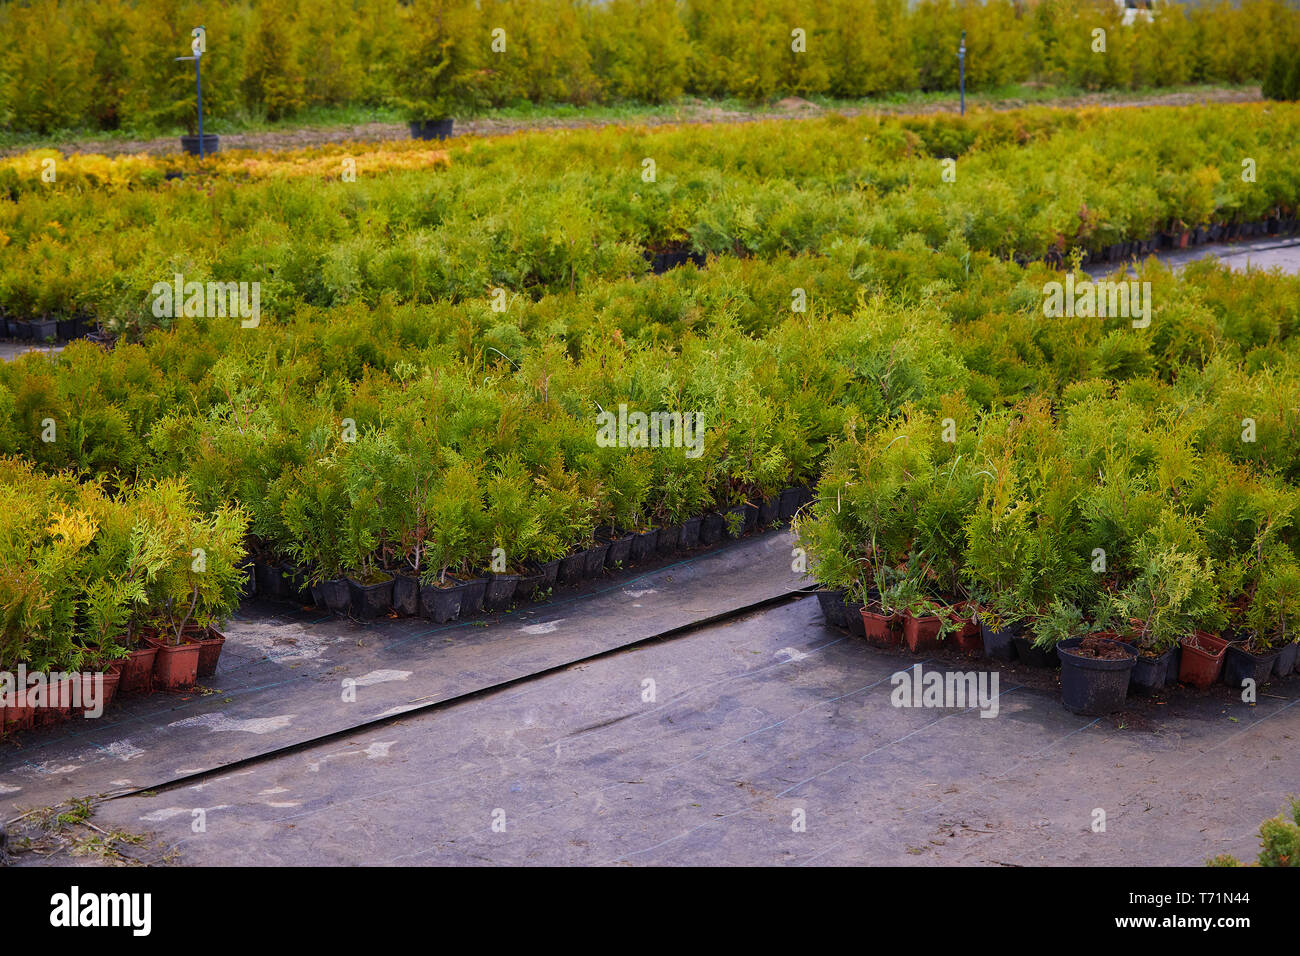 Juniper bushes in garden shop. Seedlings of juniper bushes in pots in garden store spring. Nursery of various green spruce plants for gardening. Diffe Stock Photo